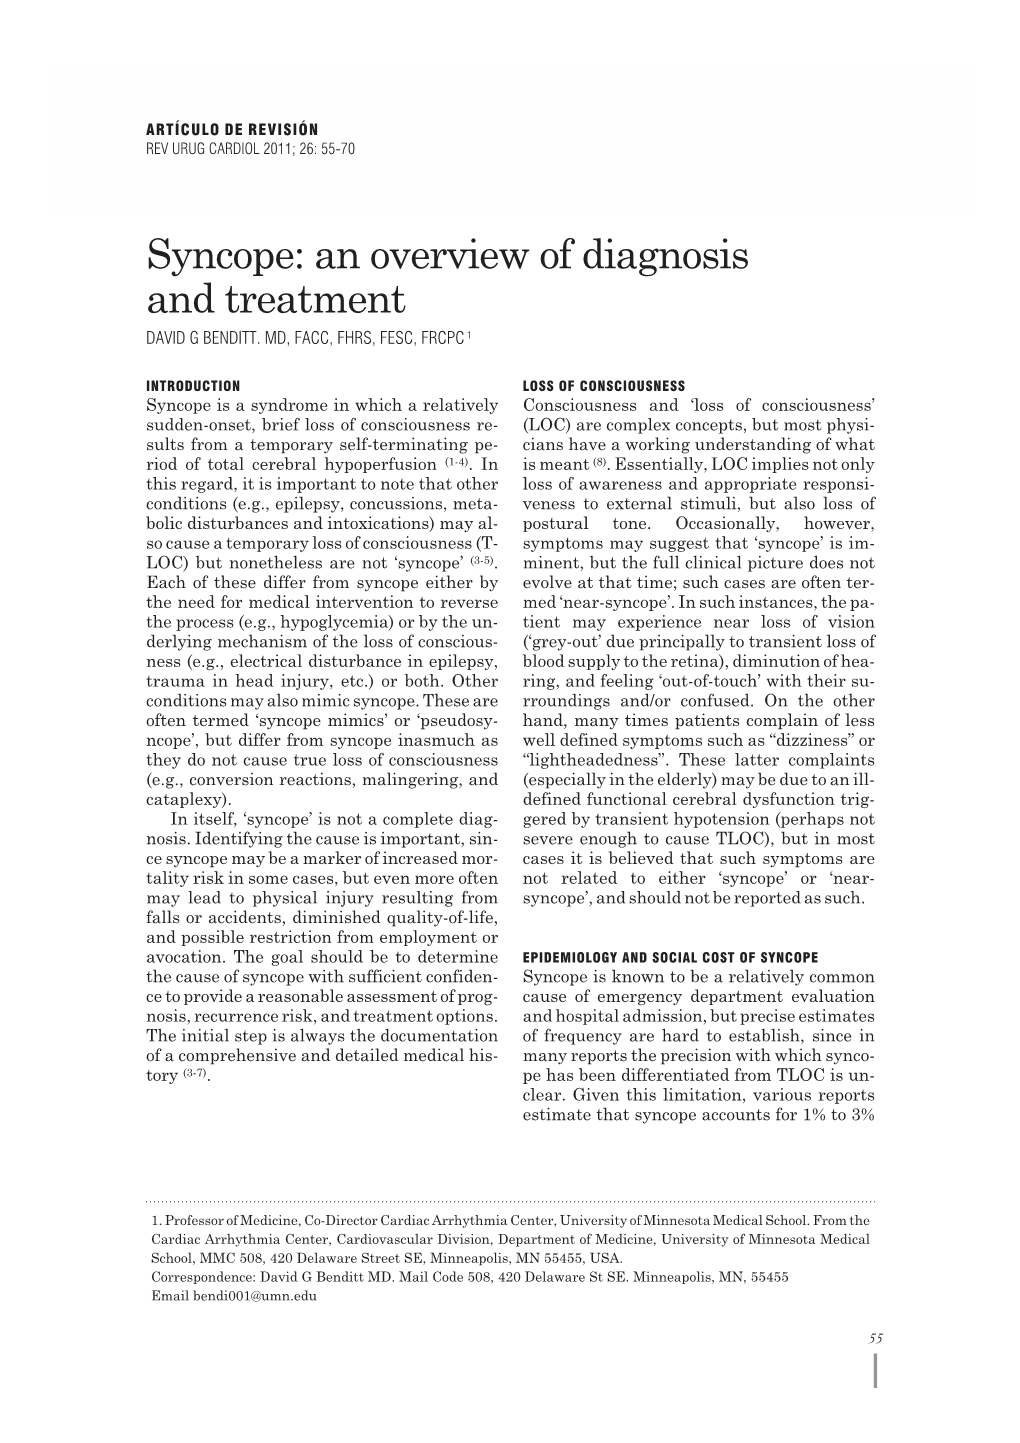 Syncope: an Overview of Diagnosis and Treatment DAVID G BENDITT